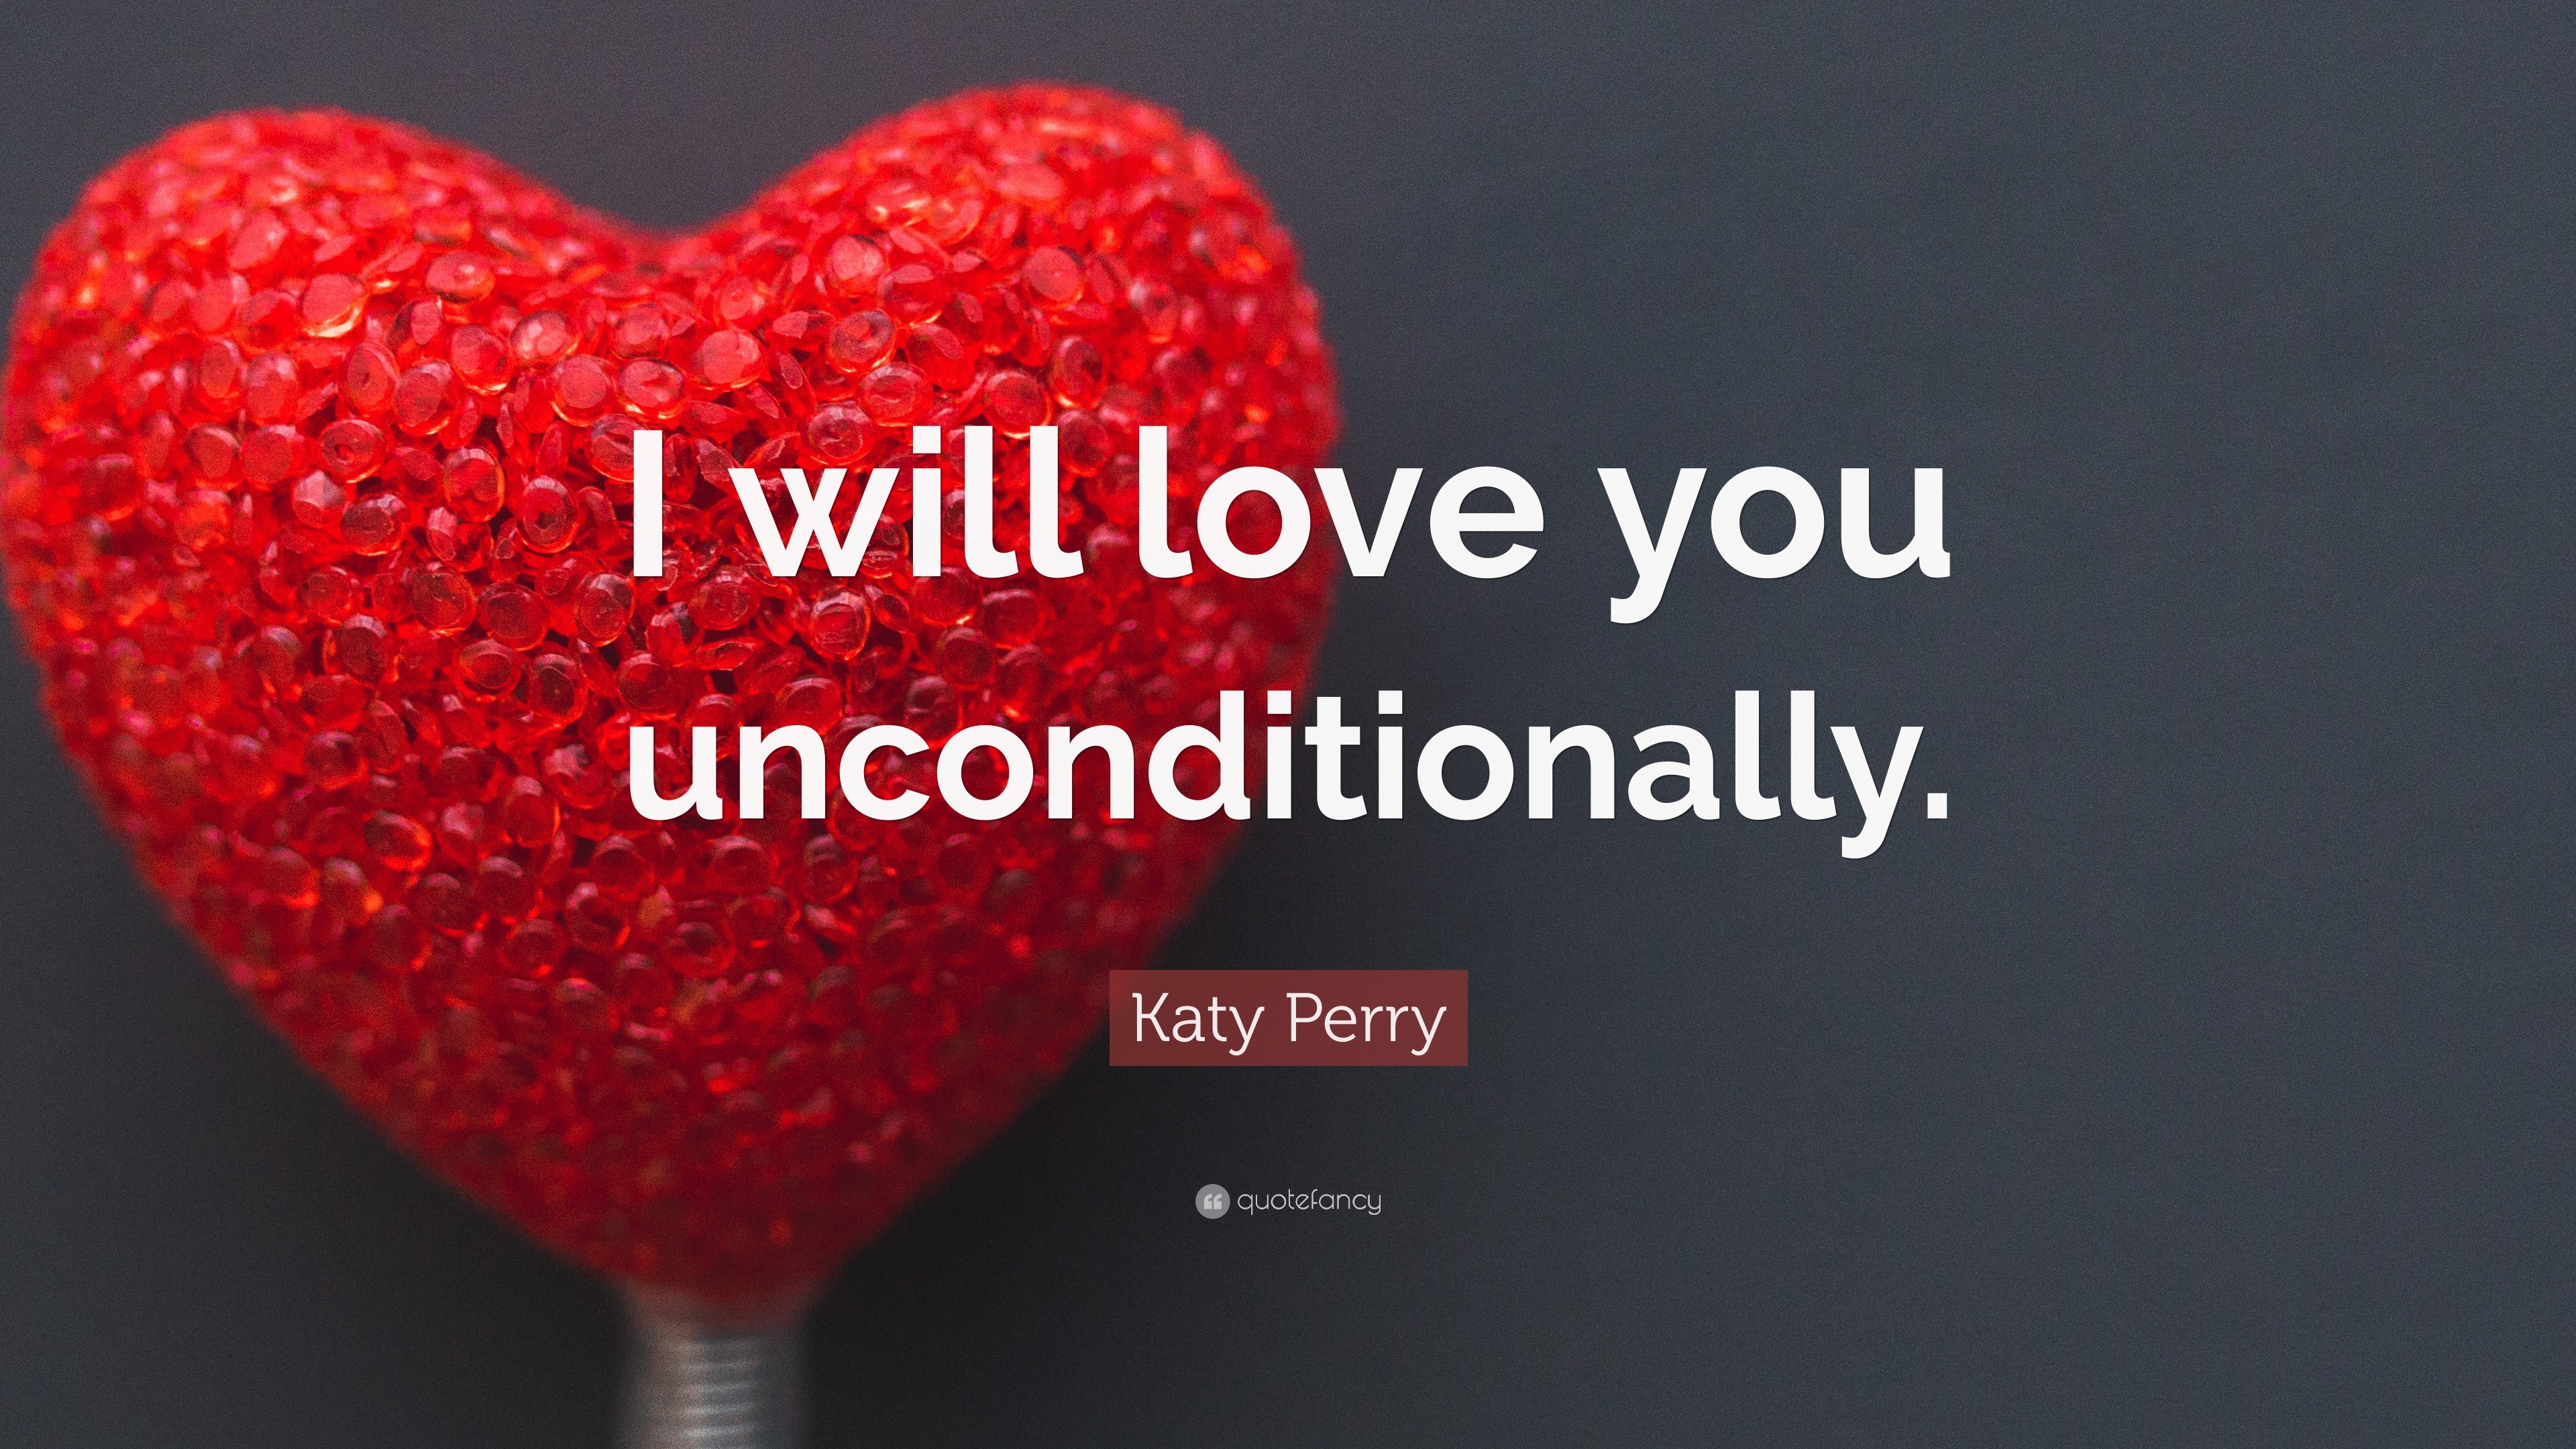 Katy Perry Quote “I will love you unconditionally ”